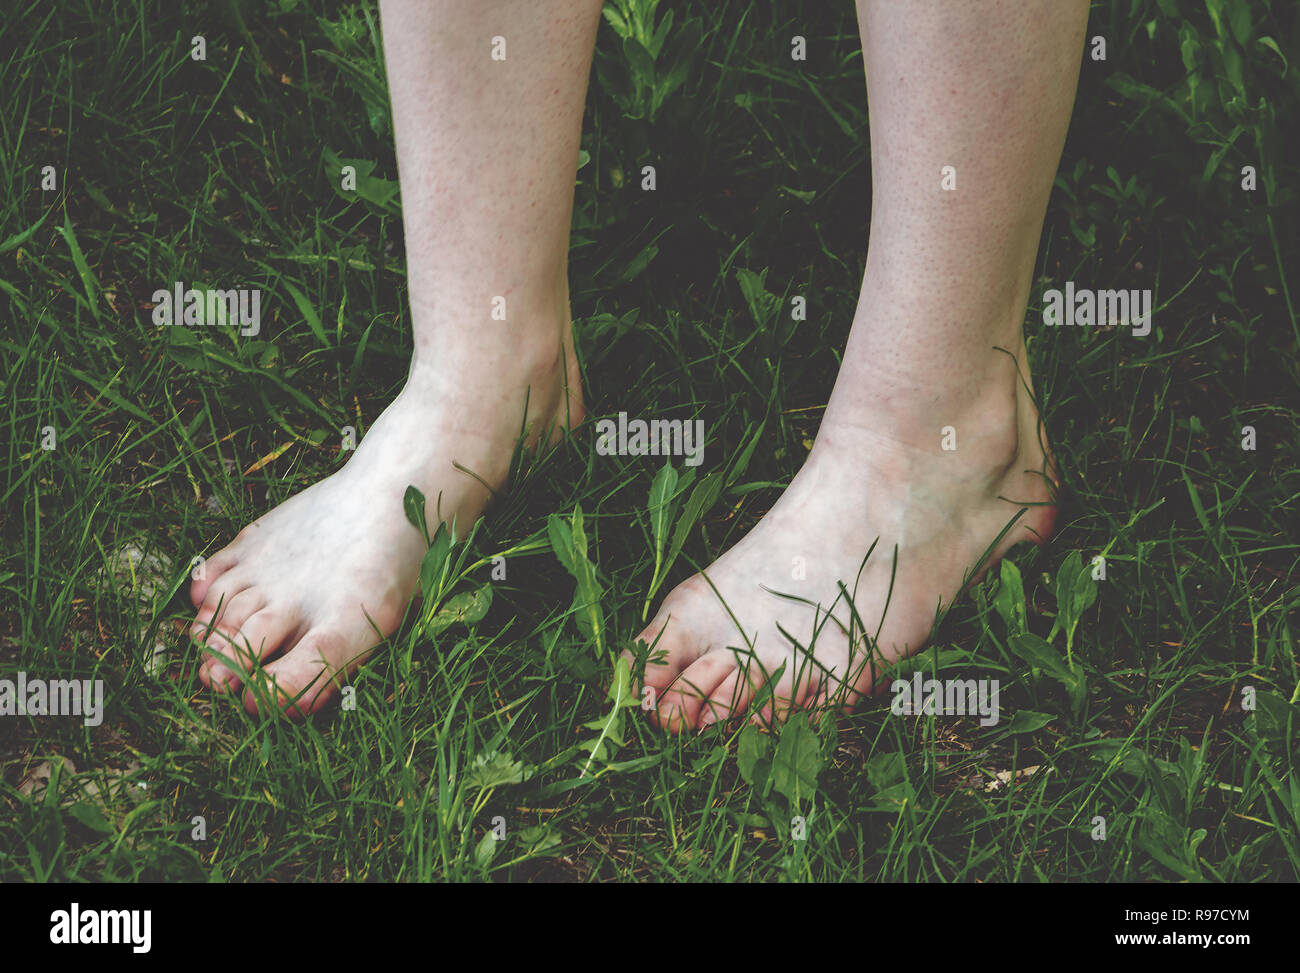 Shaved legs of the girl with very light skin and natural nails on the toes close-up. Stock Photo